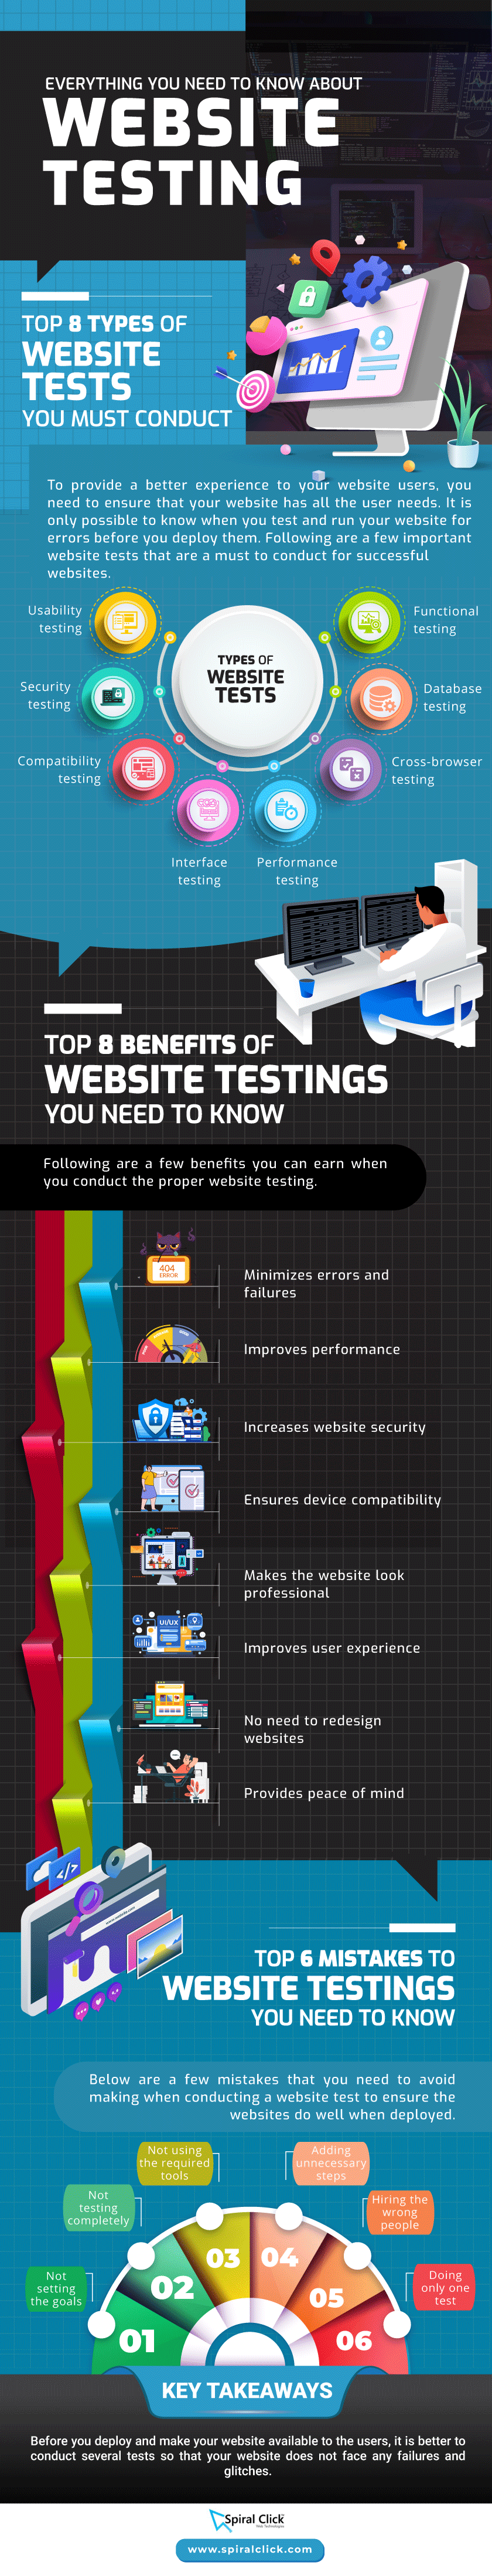 Everything You Need to Know About Website Testing